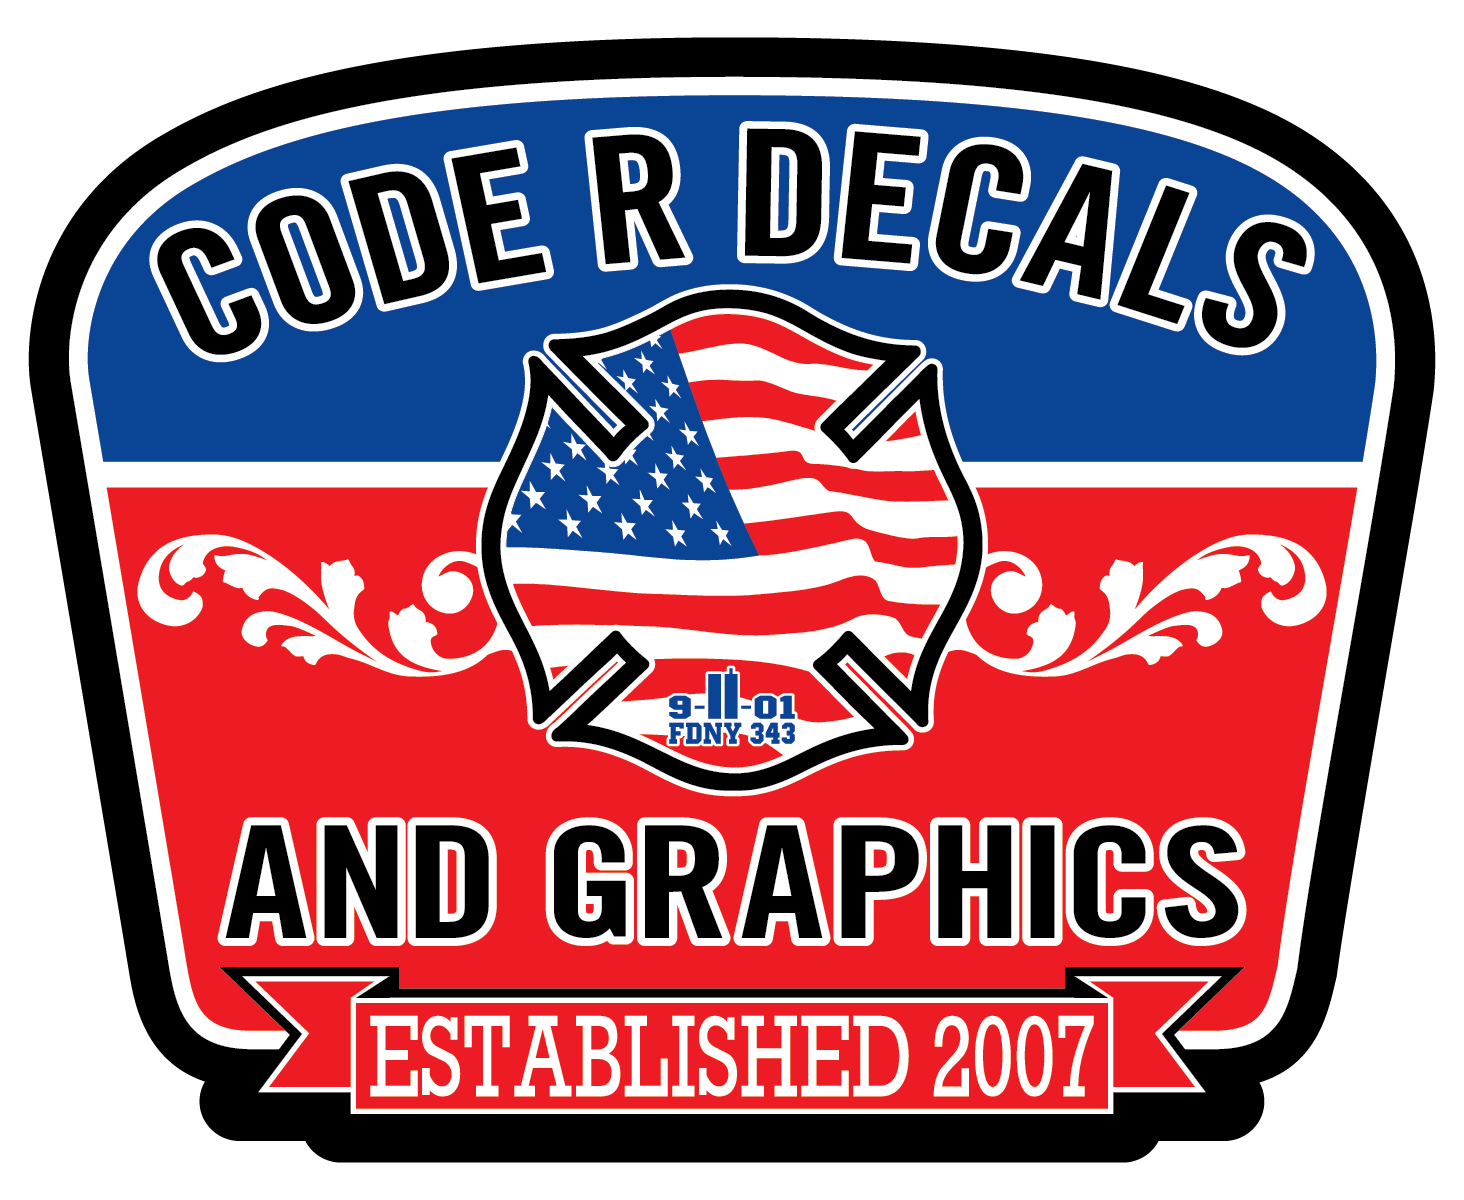 Code R Decals and Graphics